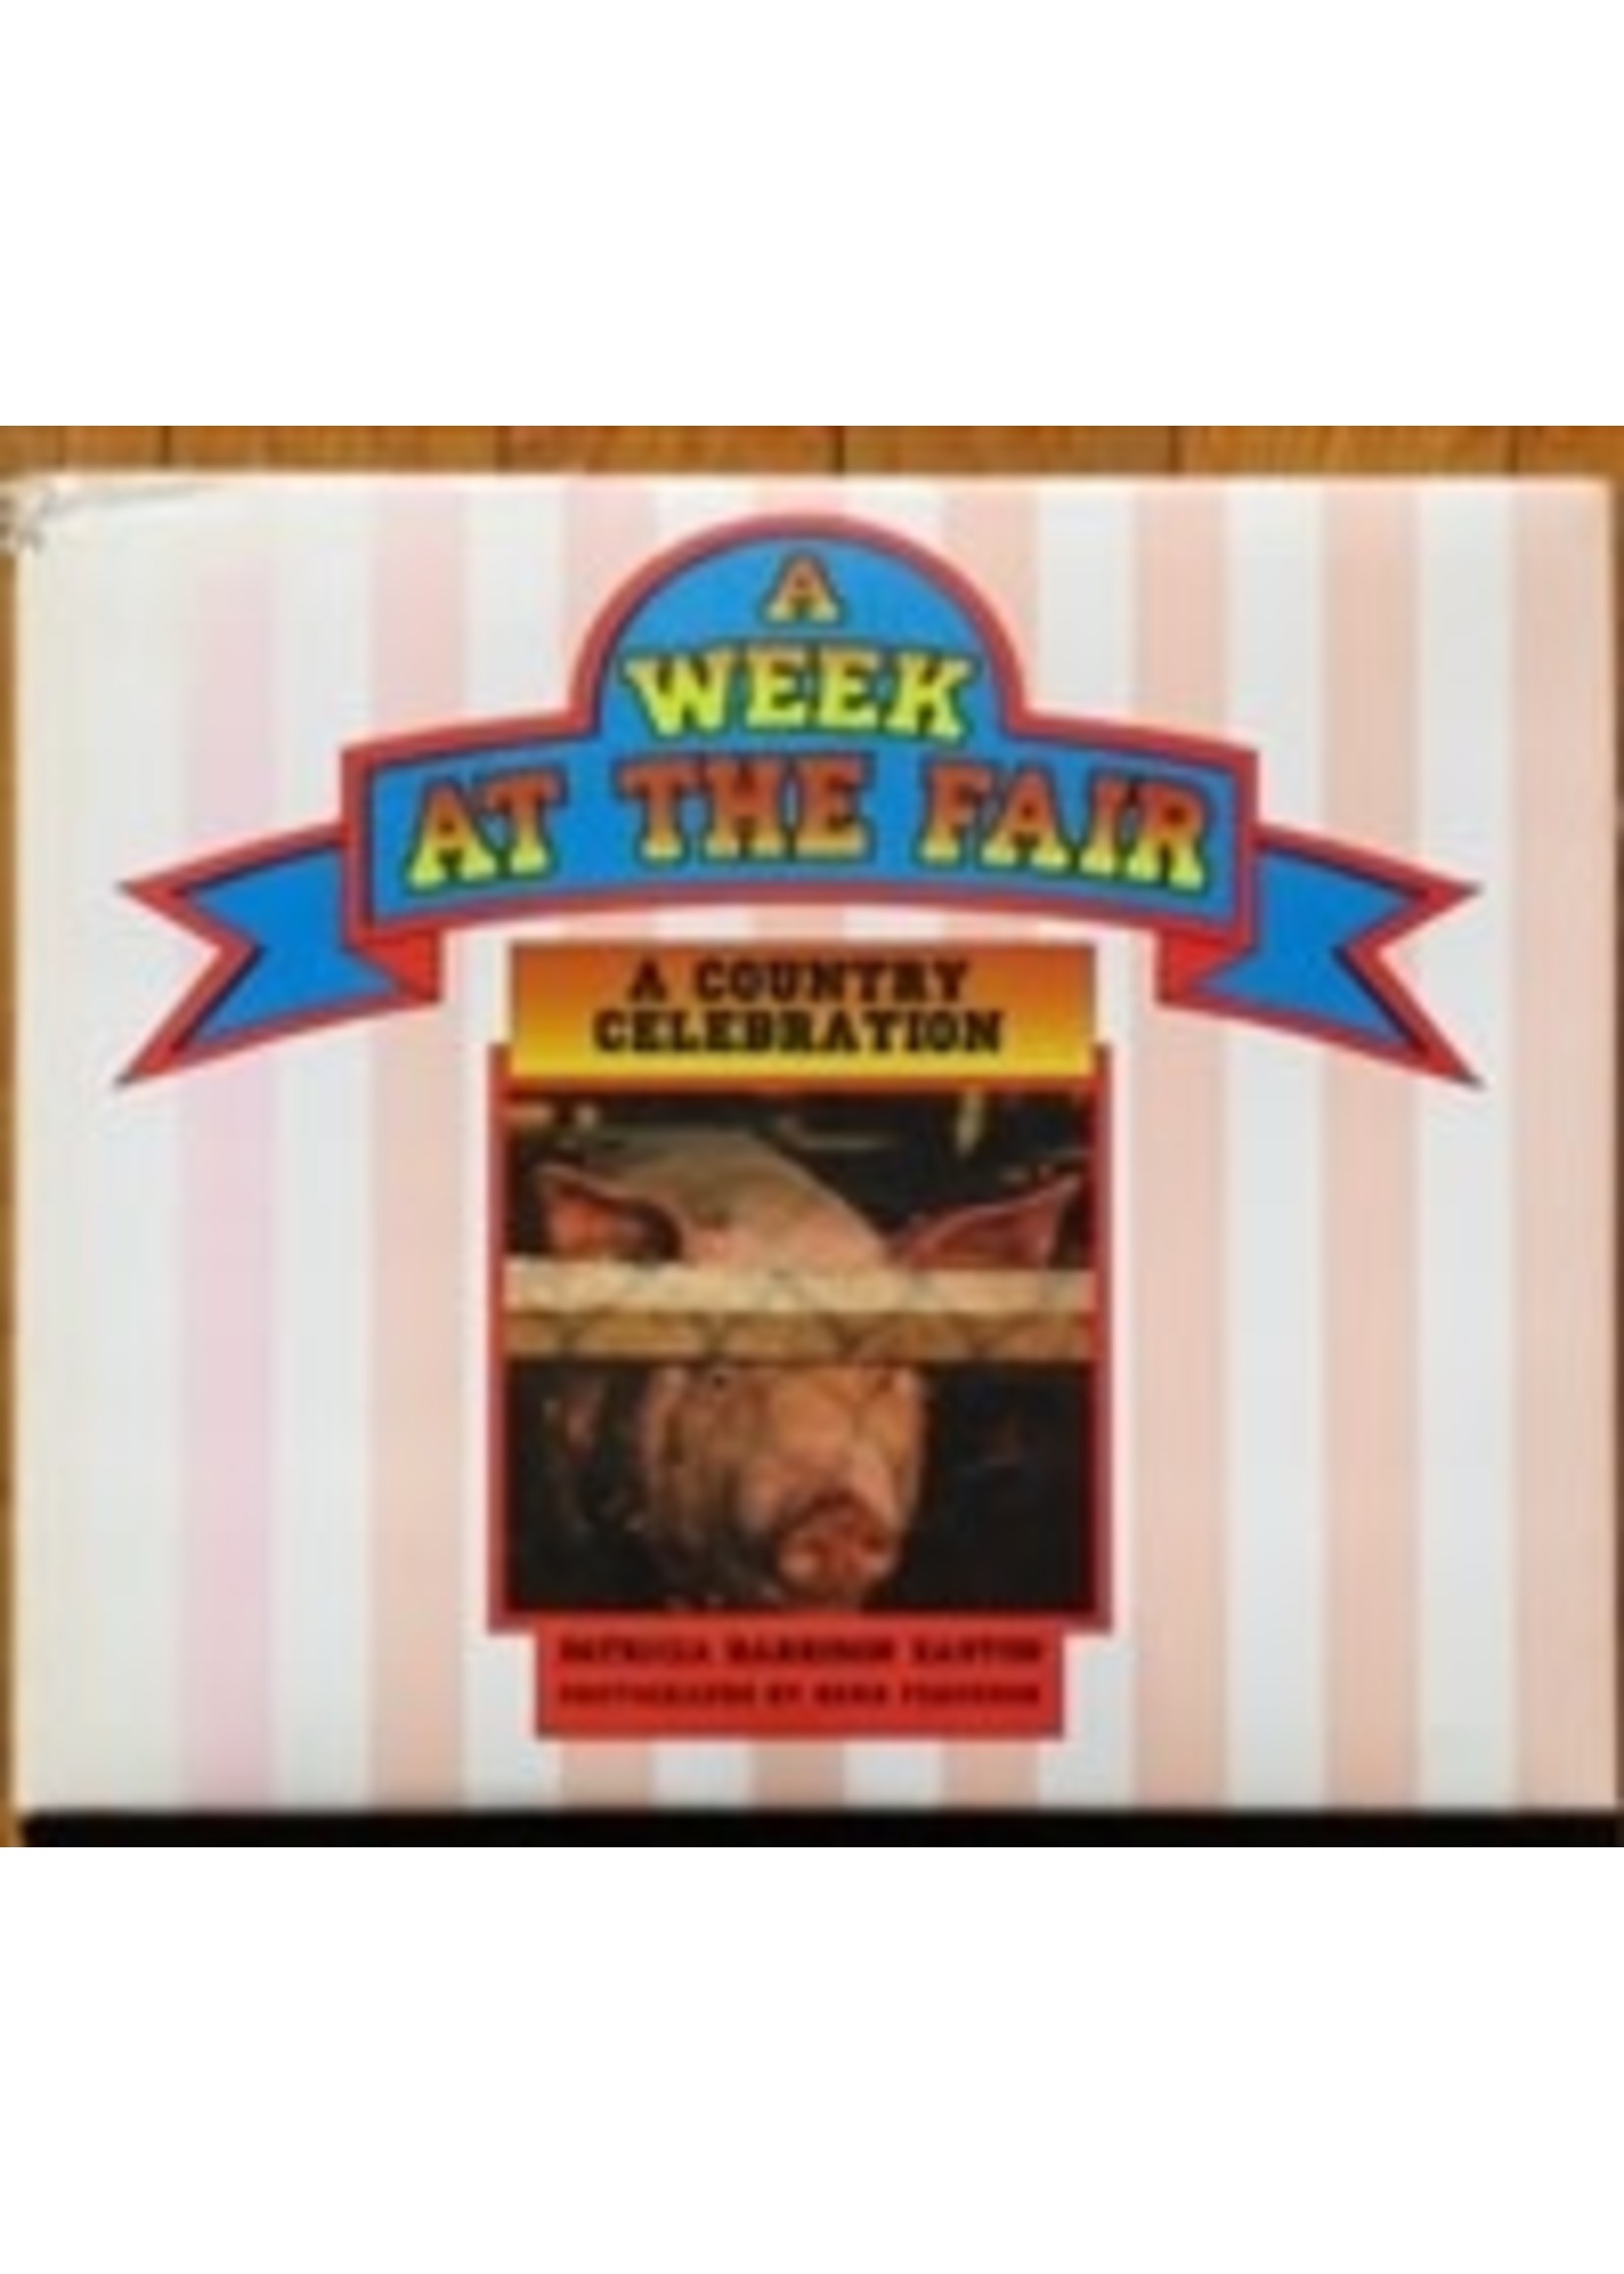 A Week at the Fair: A Country Celebration